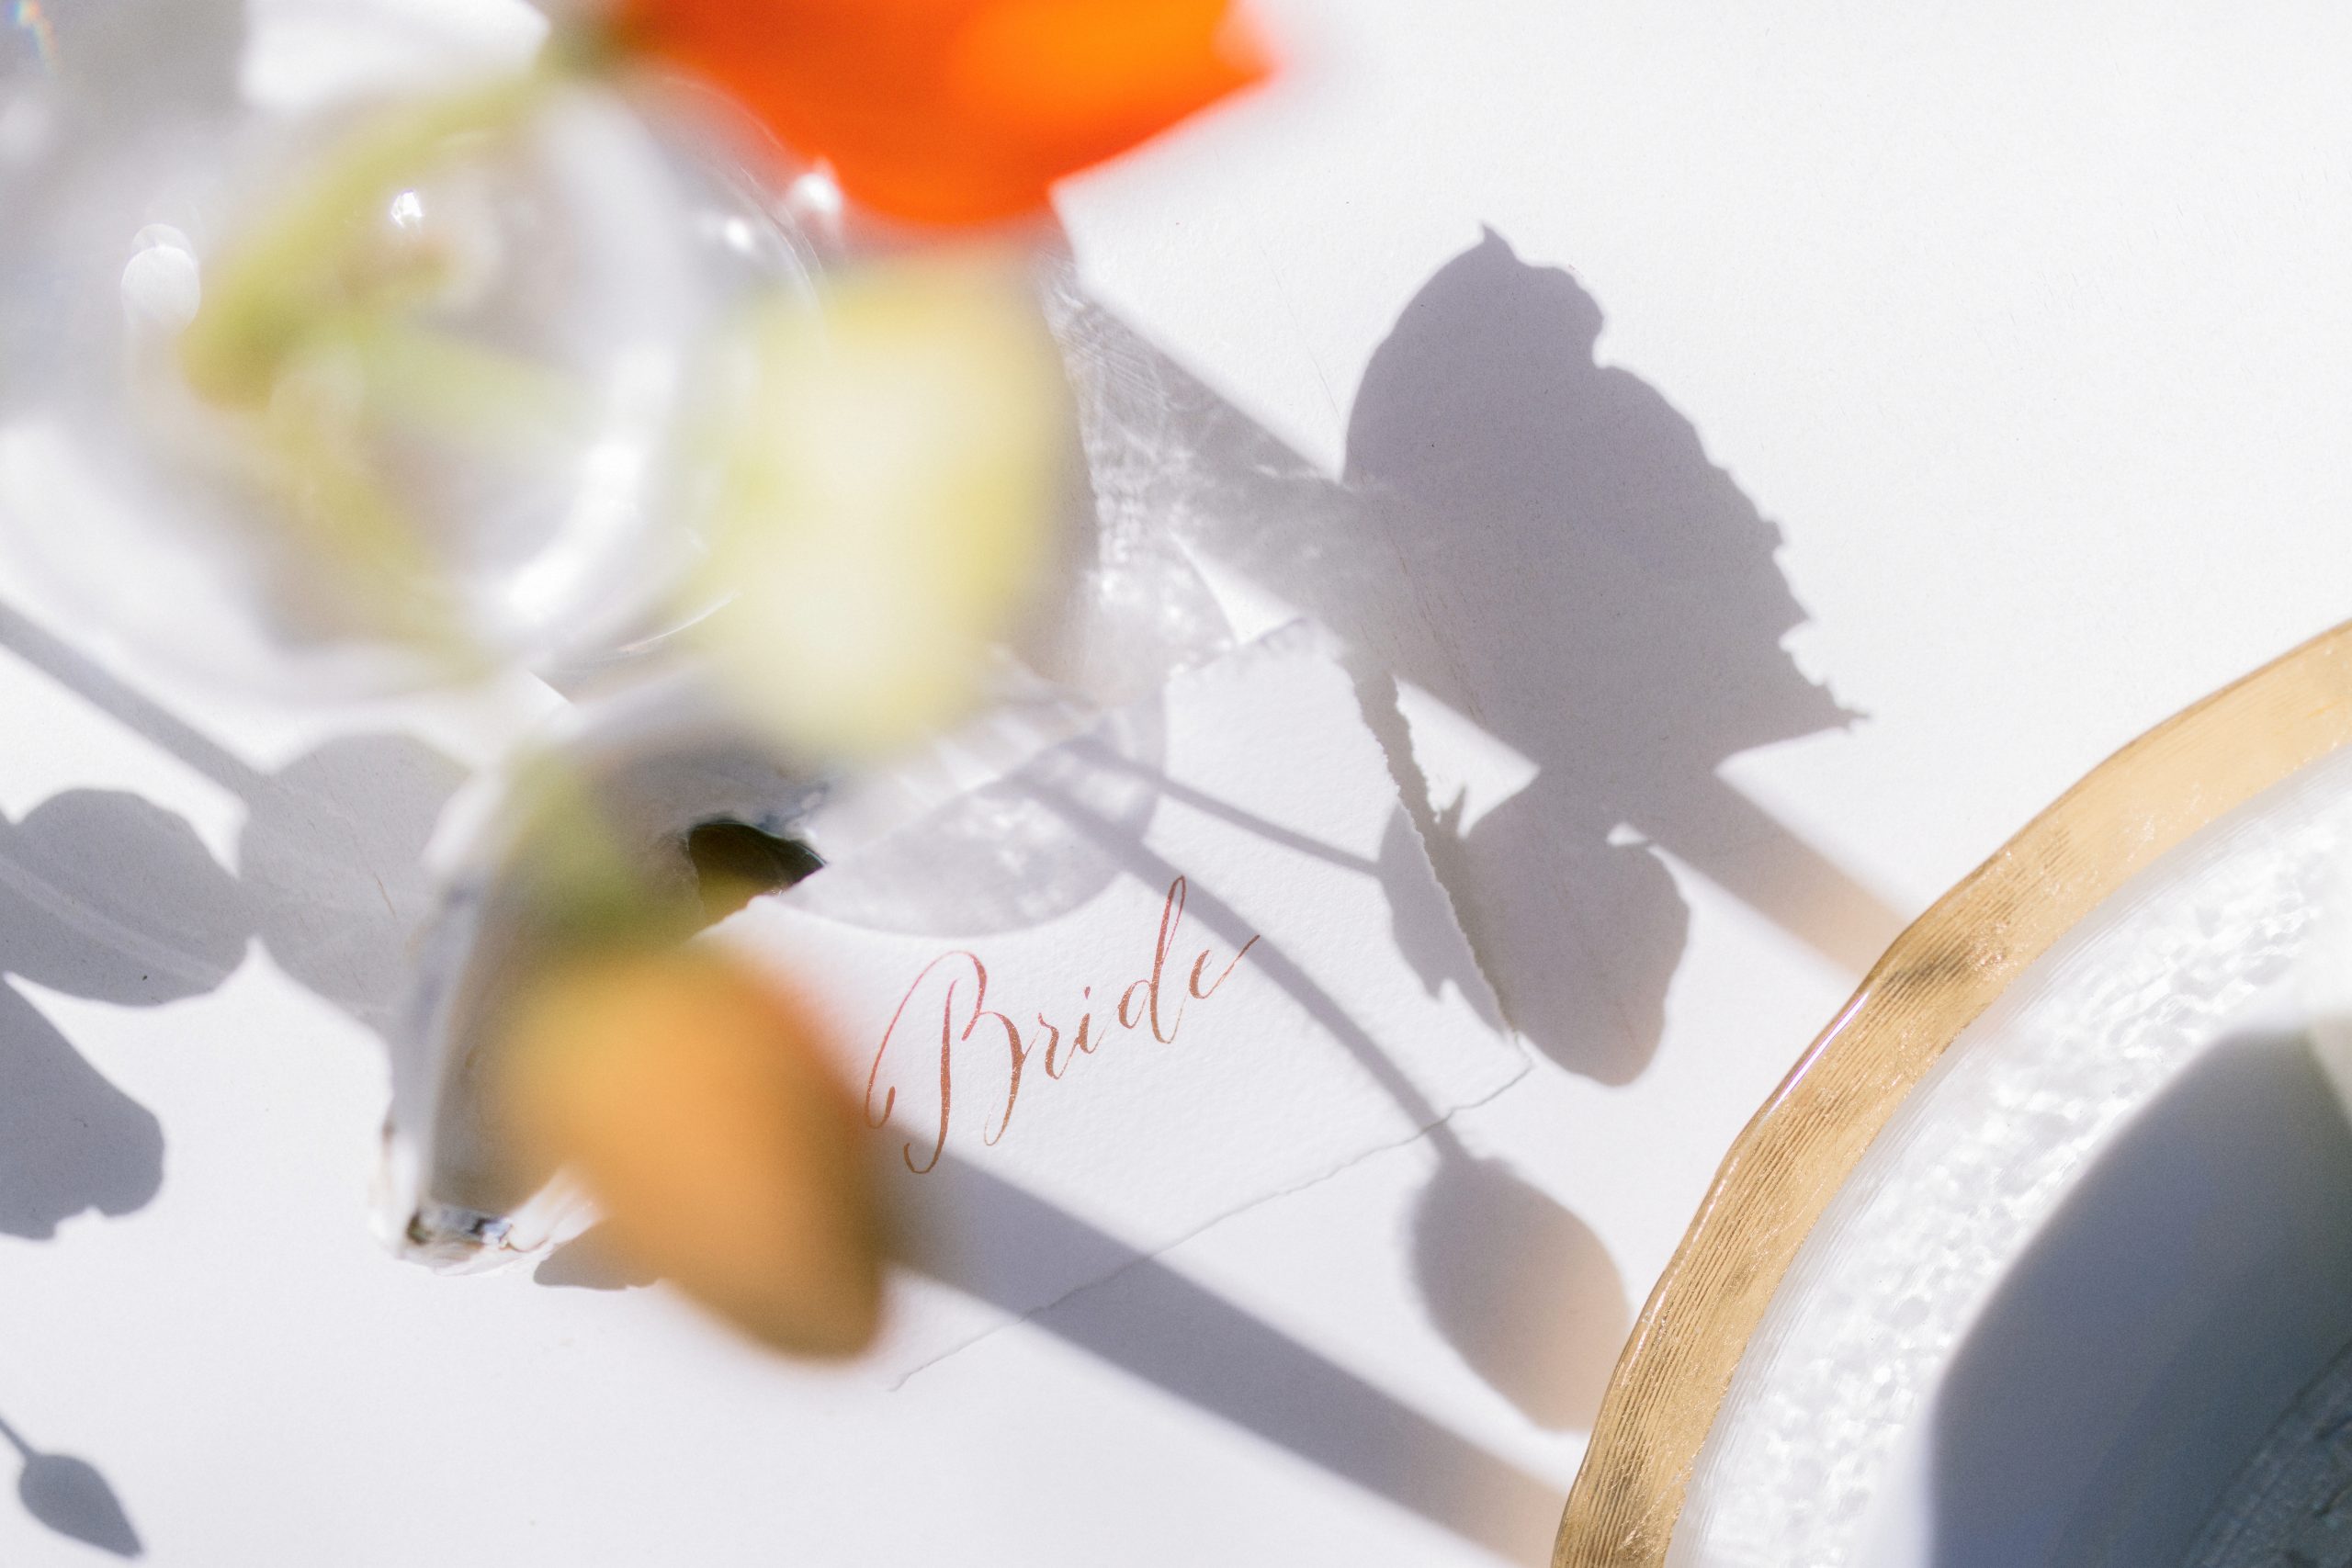 A place card that reads bride.